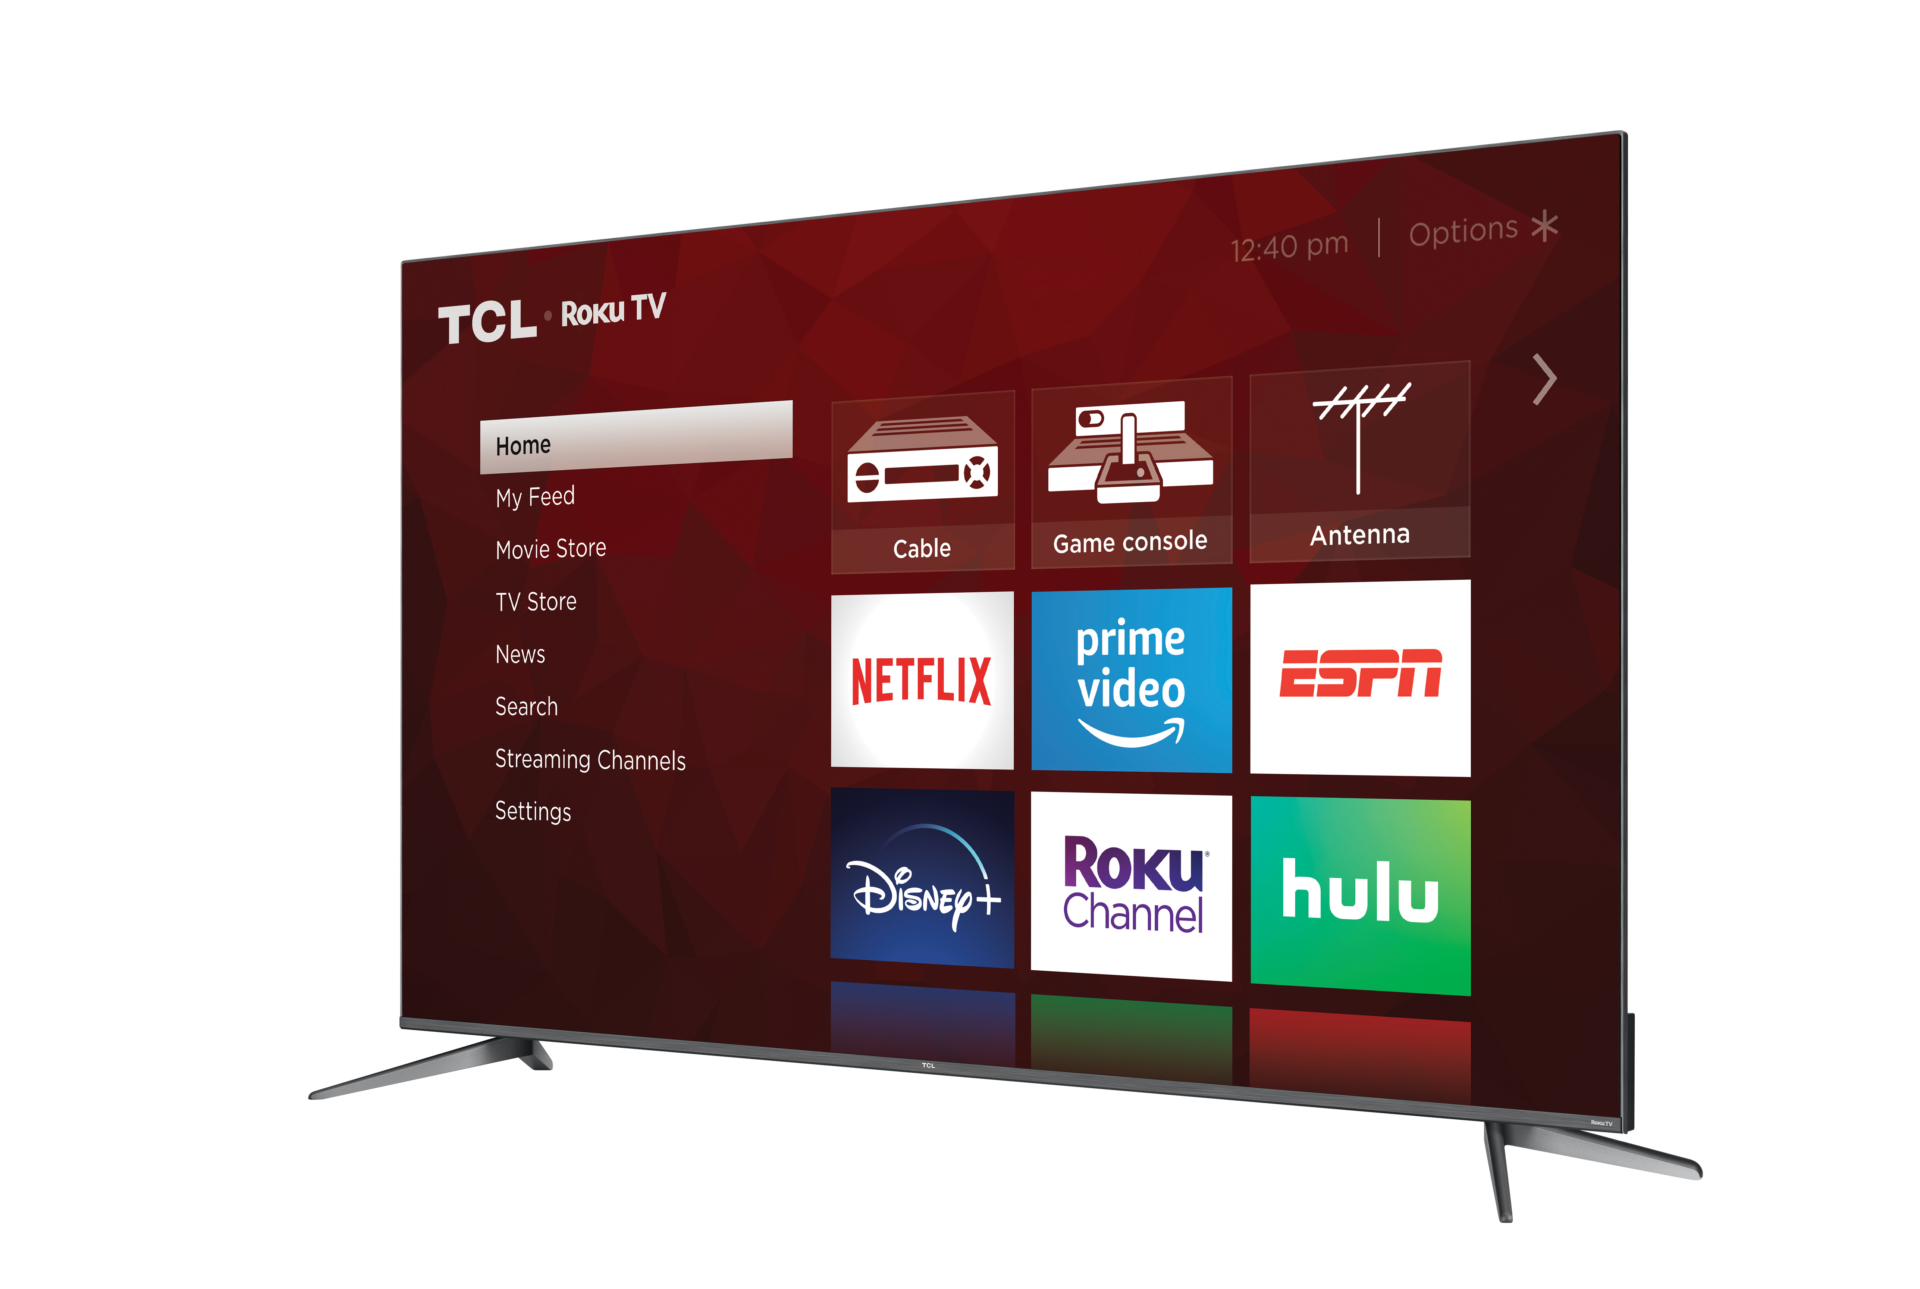 The New Series 5 From TCL